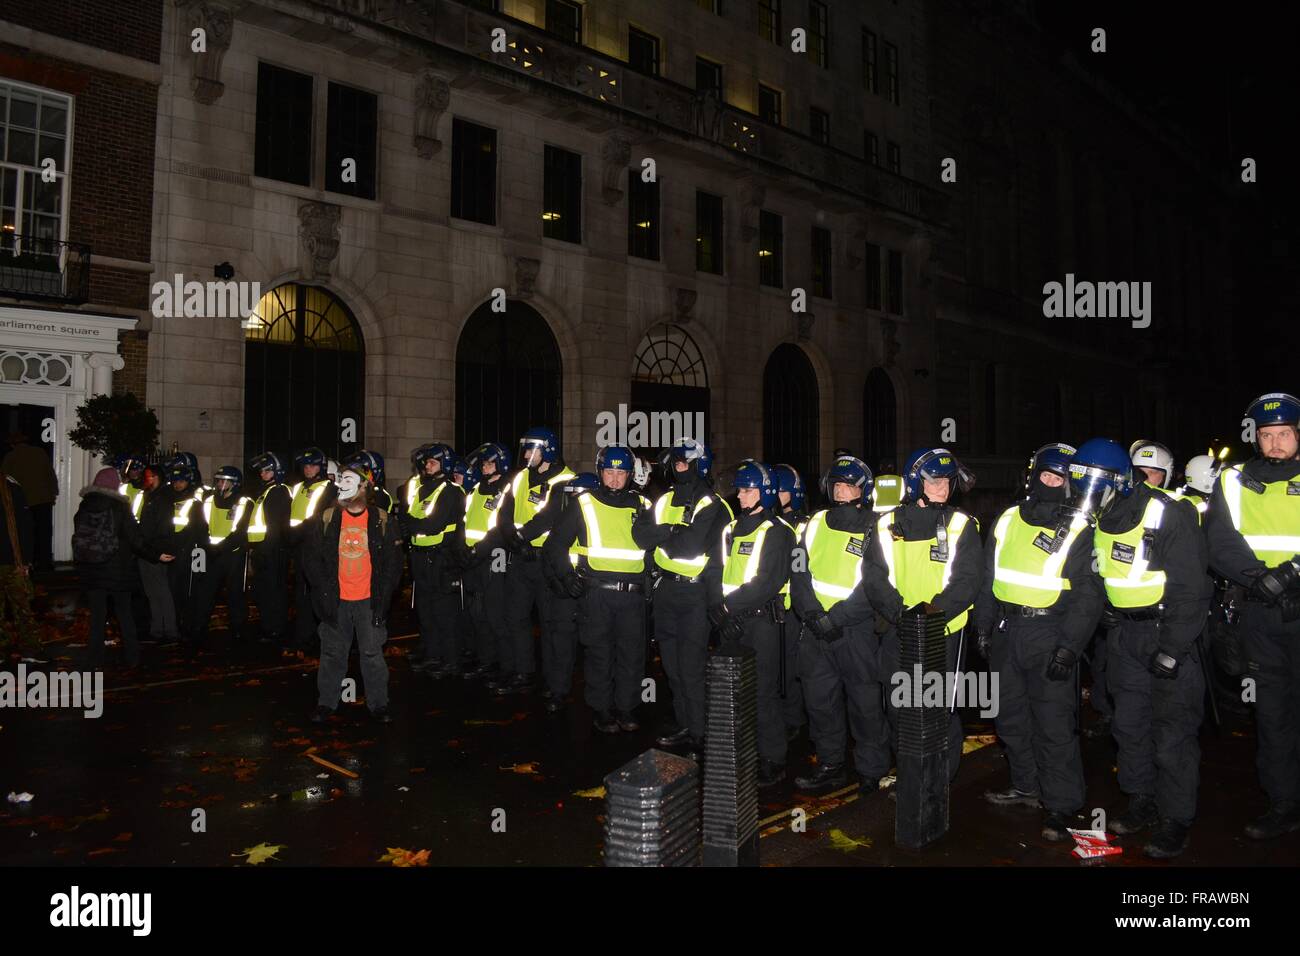 November 5th 2015. London, UK. Police officers can be seen forming lines in full public order uniform following clashes with the public. ©Marc Ward/Alamy Stock Photo